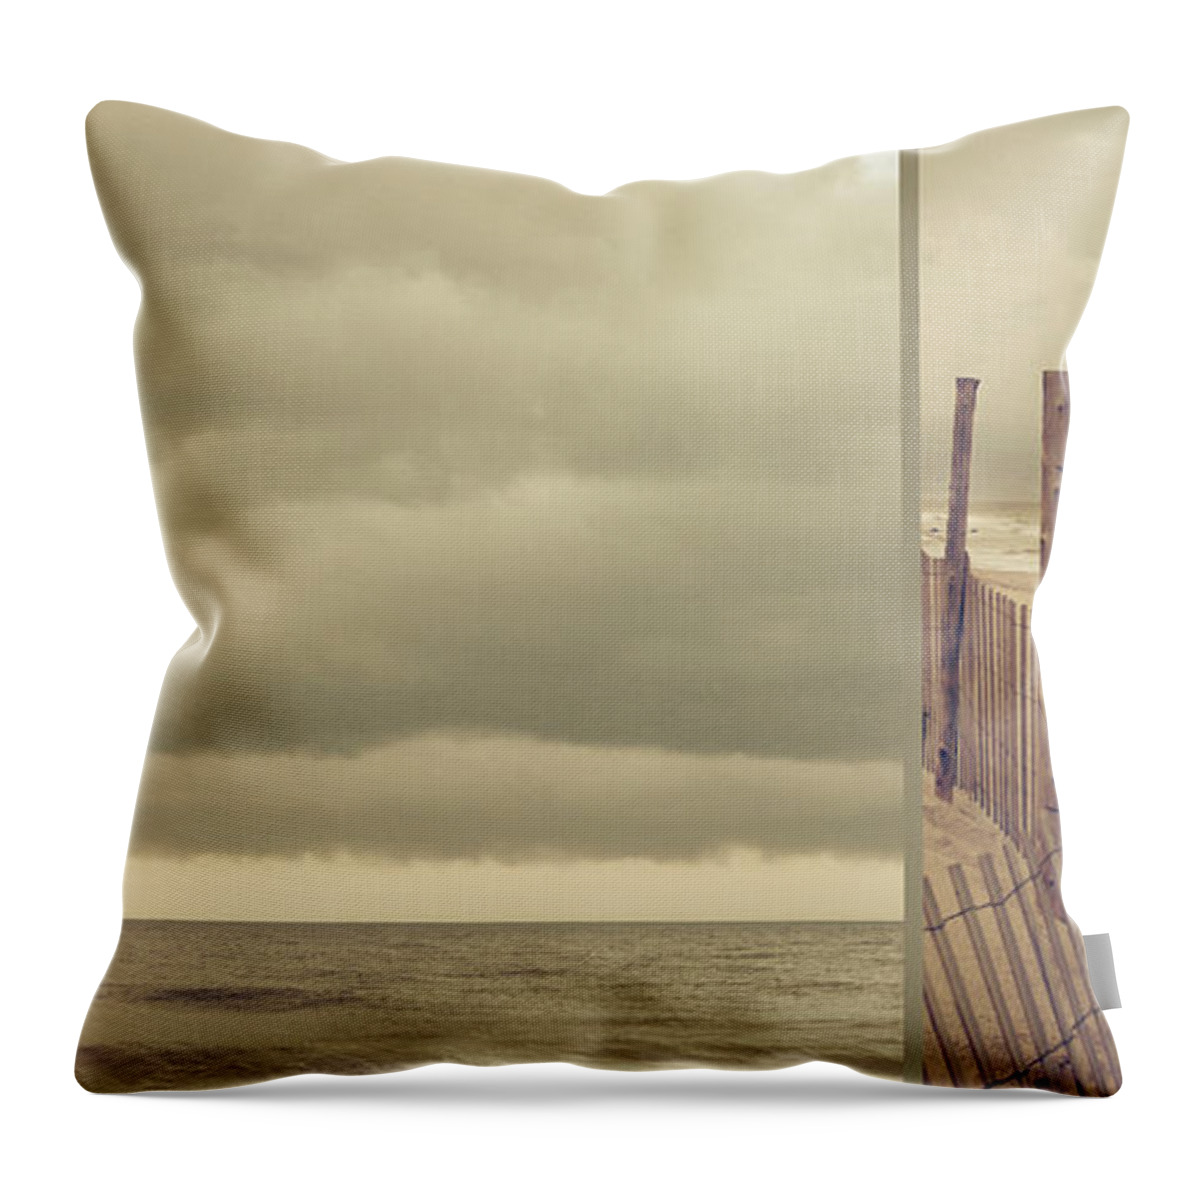 Diptych Throw Pillow featuring the photograph The Ocean Speaks My Truths by Dana DiPasquale